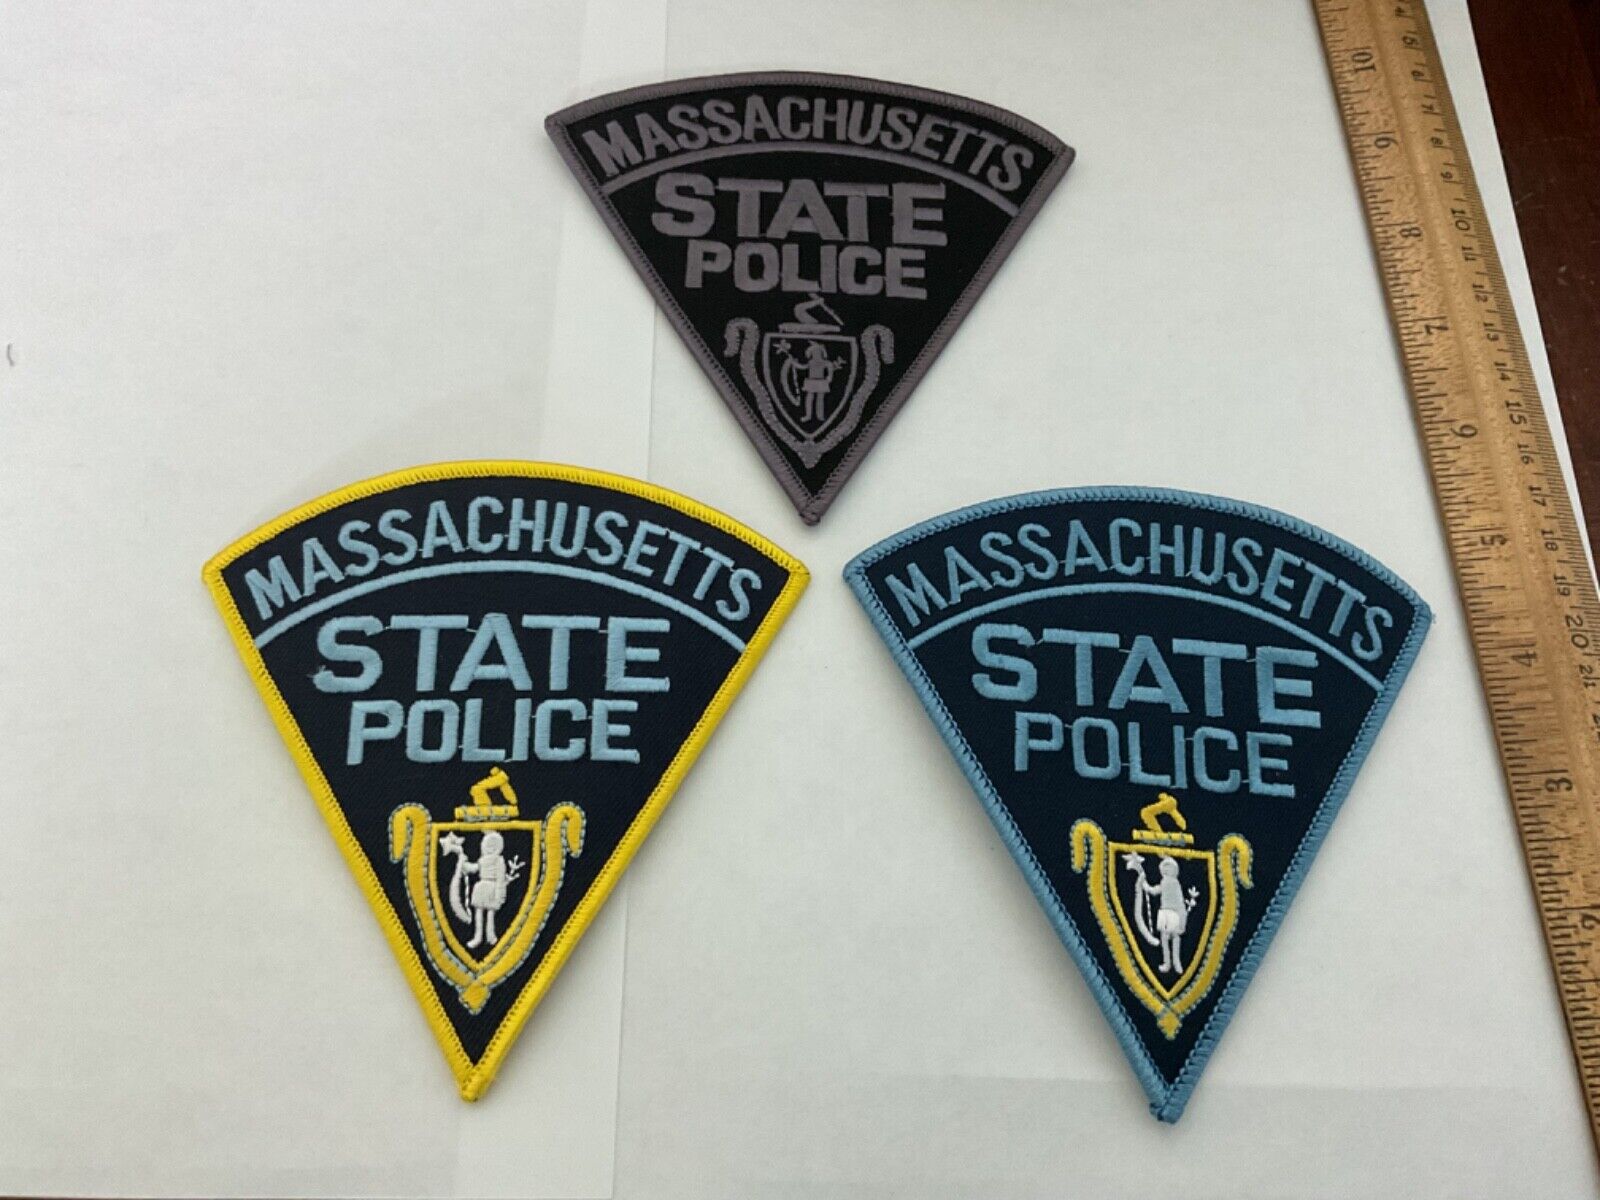 Massachusetts State Police issue collectable patch set 3 pieces new full size